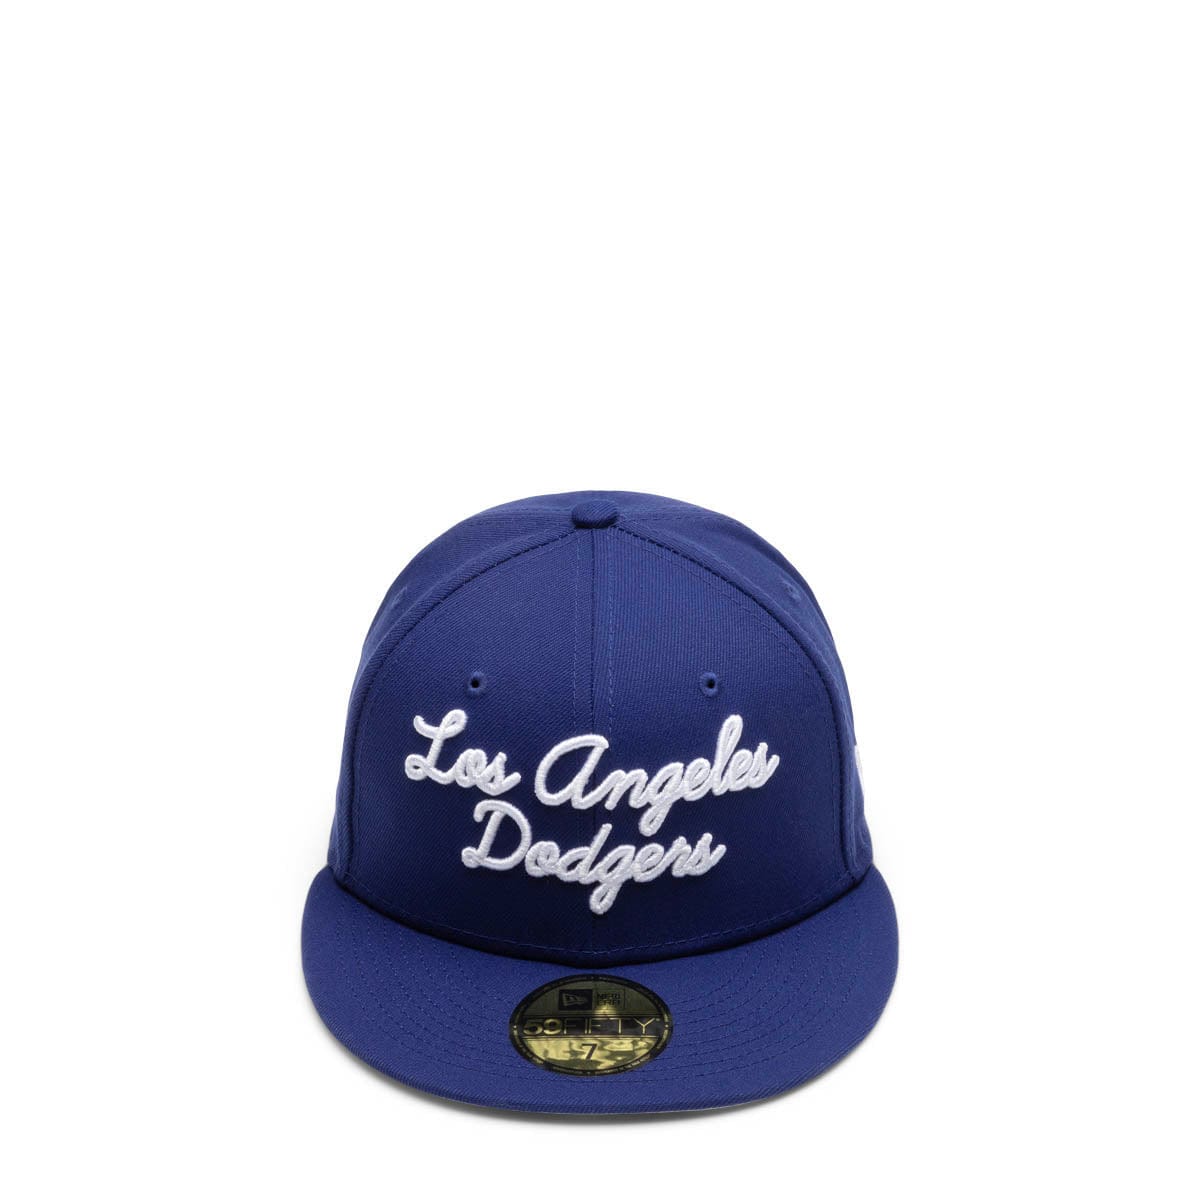 New Era 59Fifty League Basic Fitted Cap - Los Angeles Dodgers